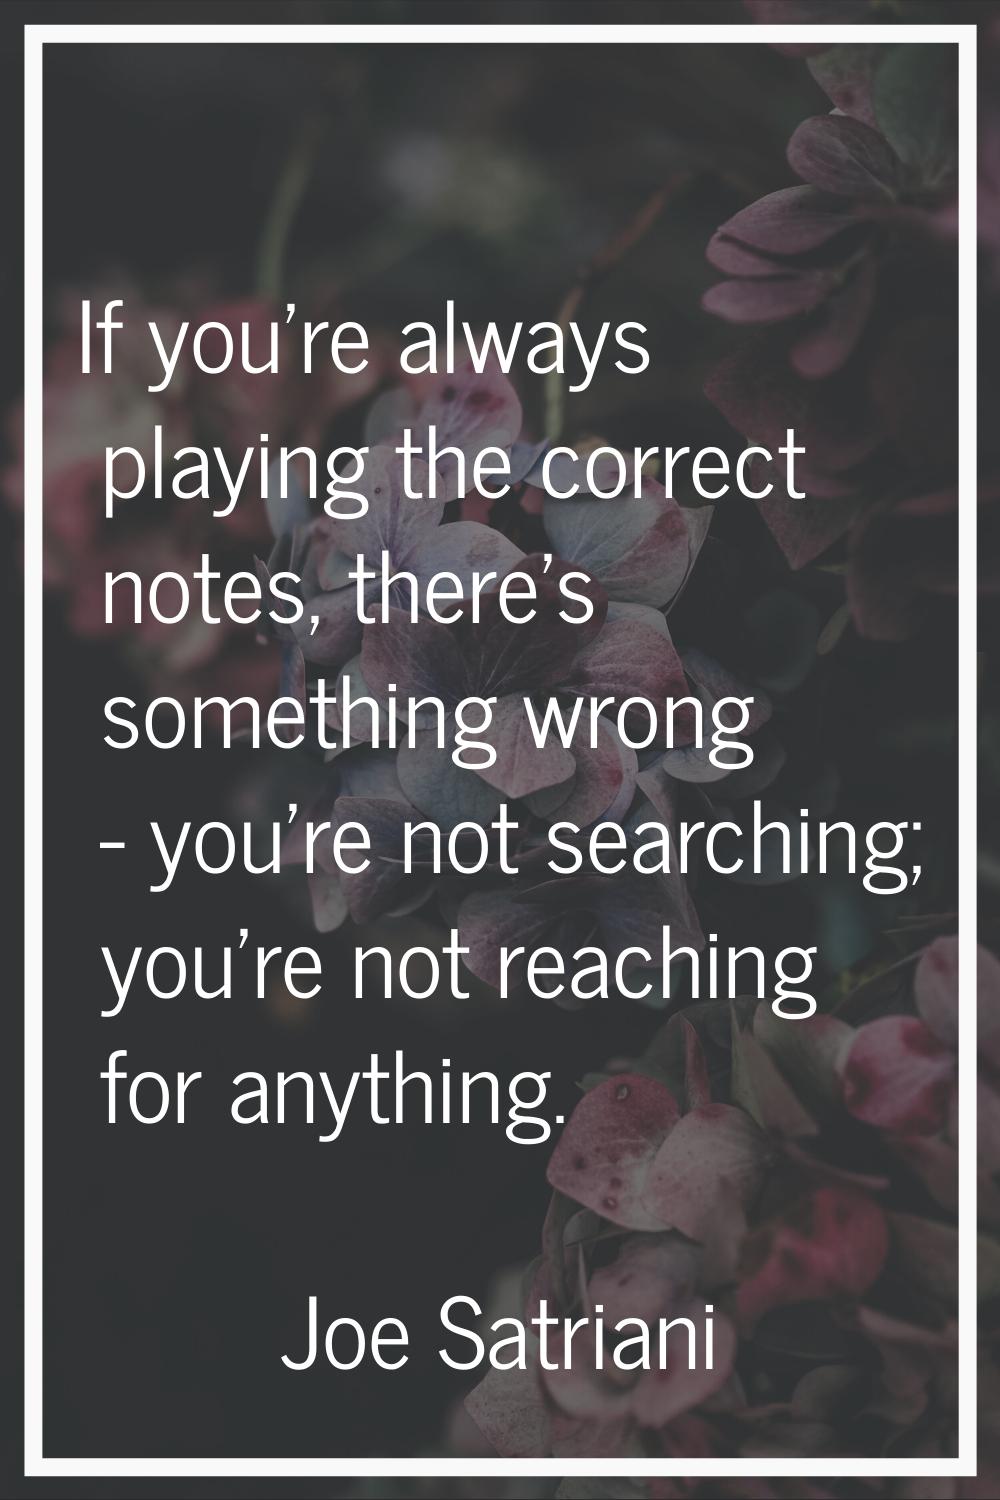 If you're always playing the correct notes, there's something wrong - you're not searching; you're 